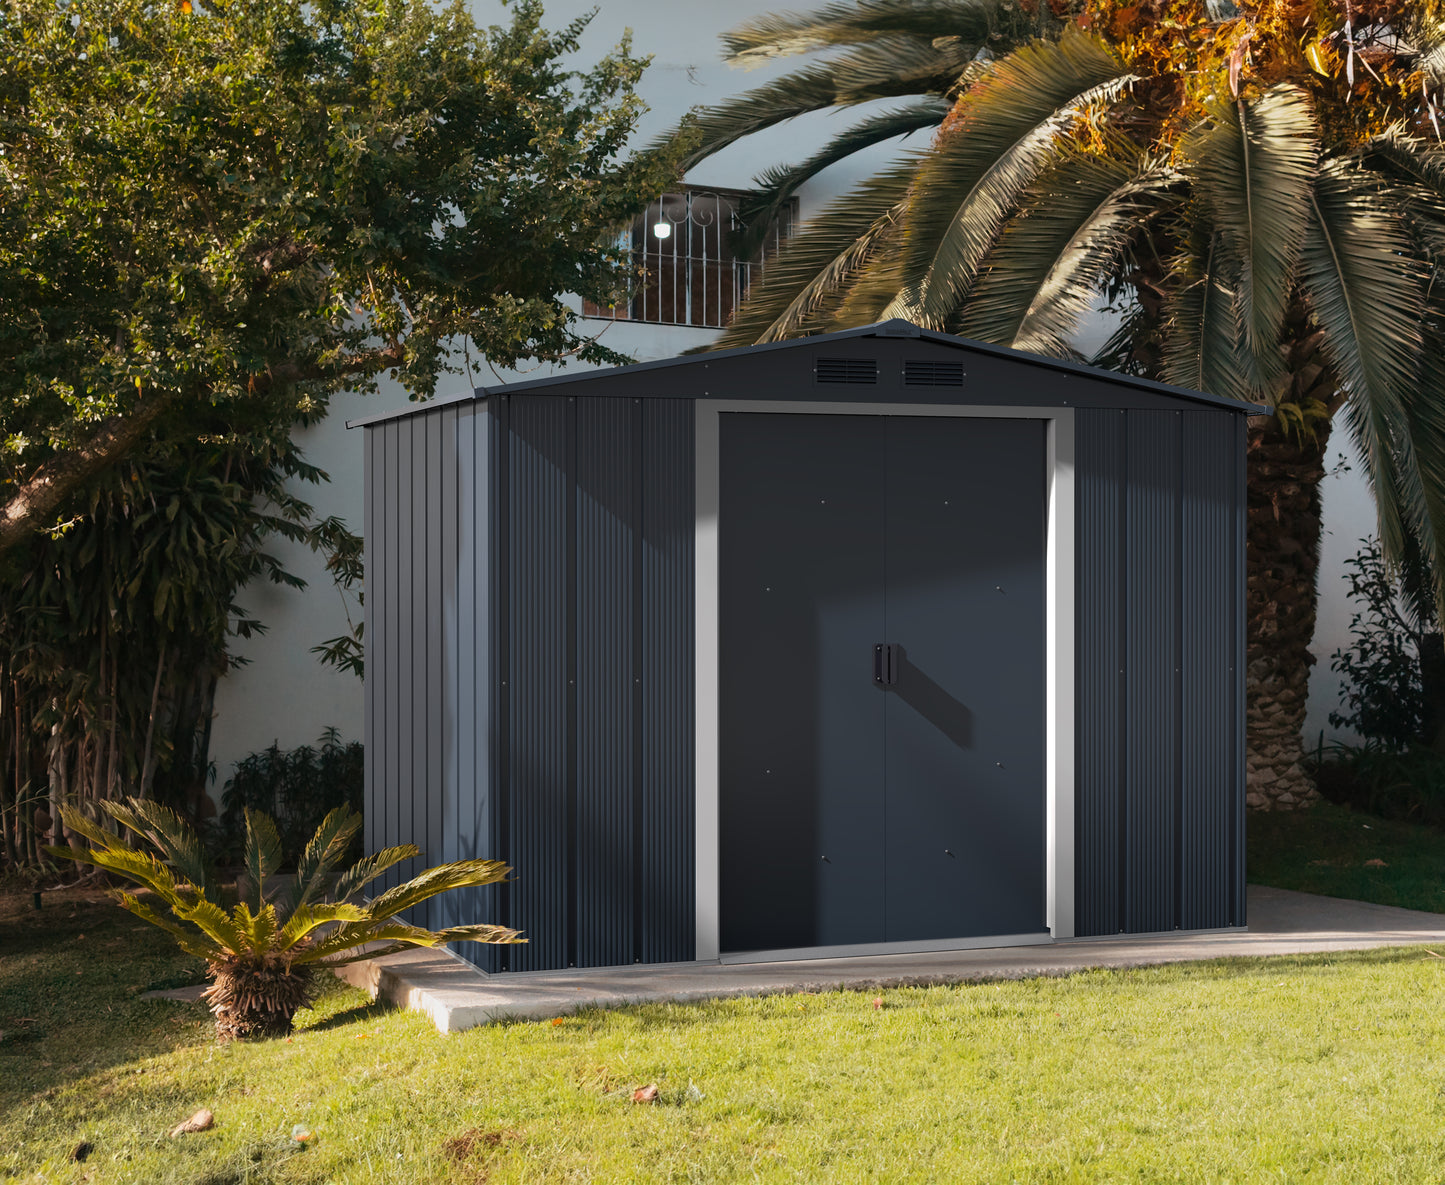 Duramax ECO 2.52 x 1.74 m Metal Shed - Anthracite